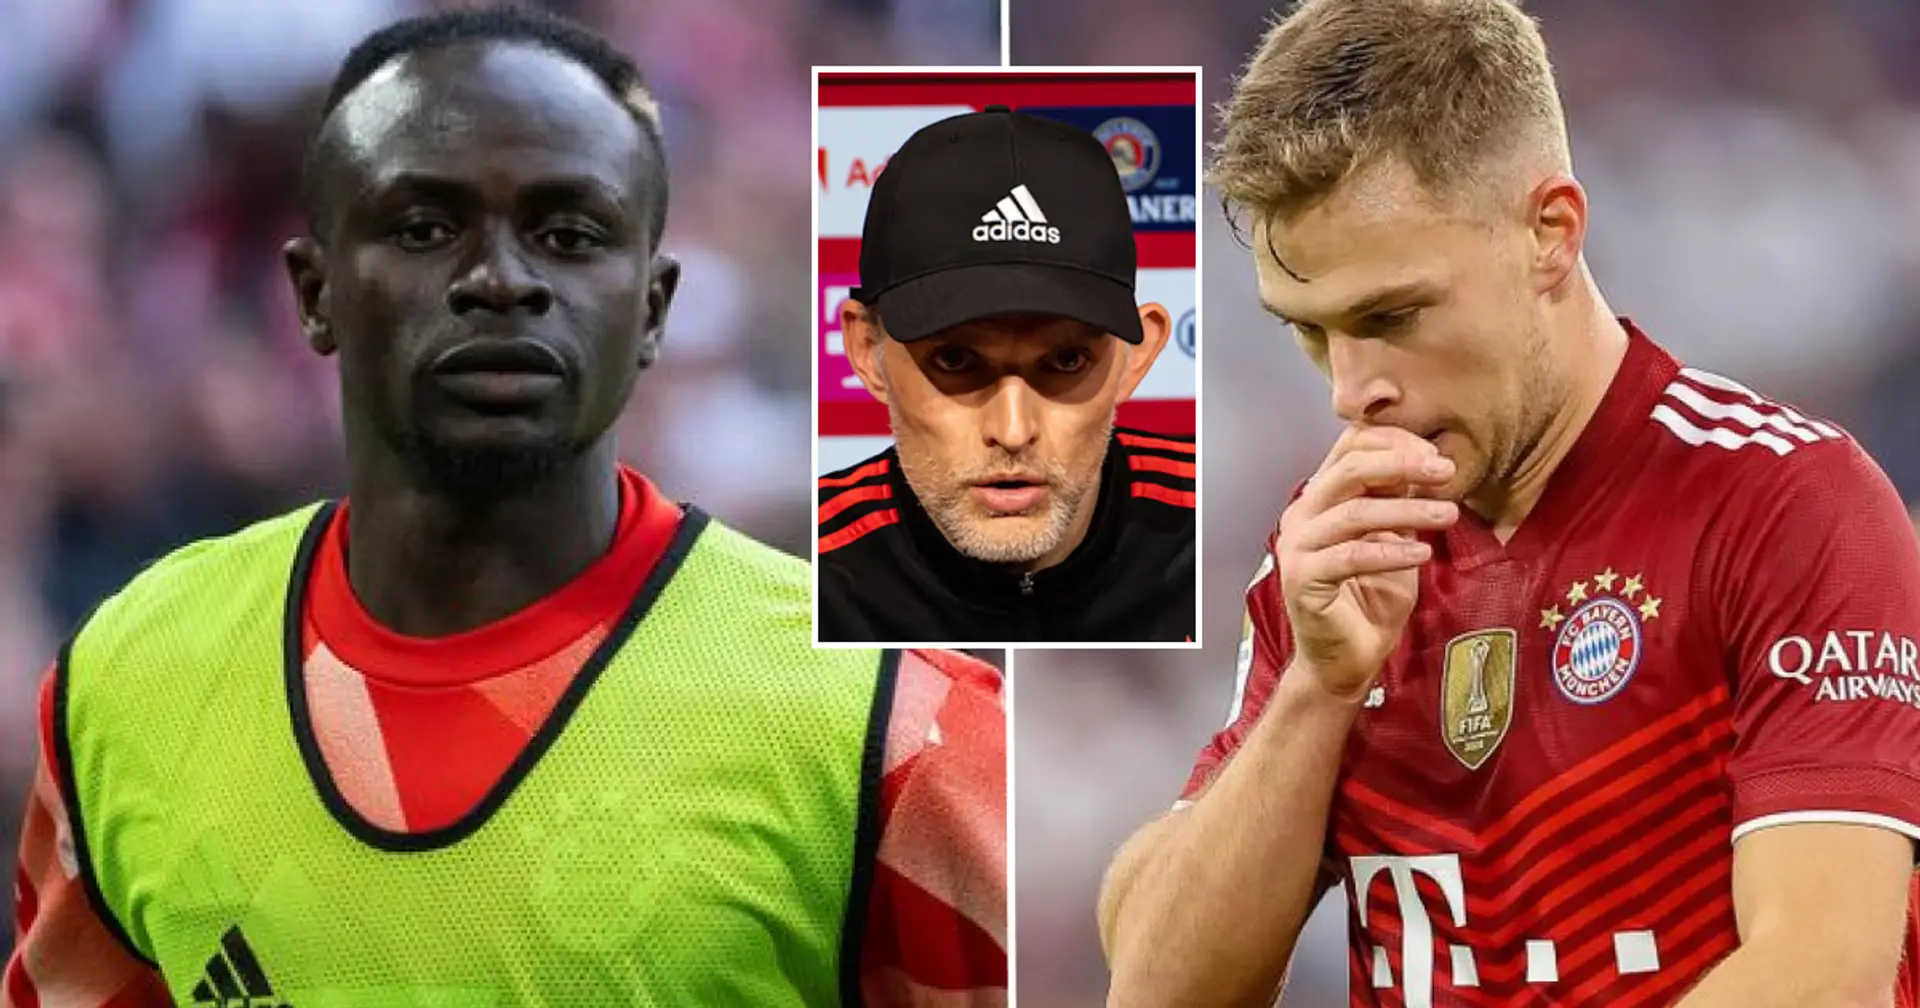 Bayern Munich put up 3 players for sale — 'none of them is Kimmich'